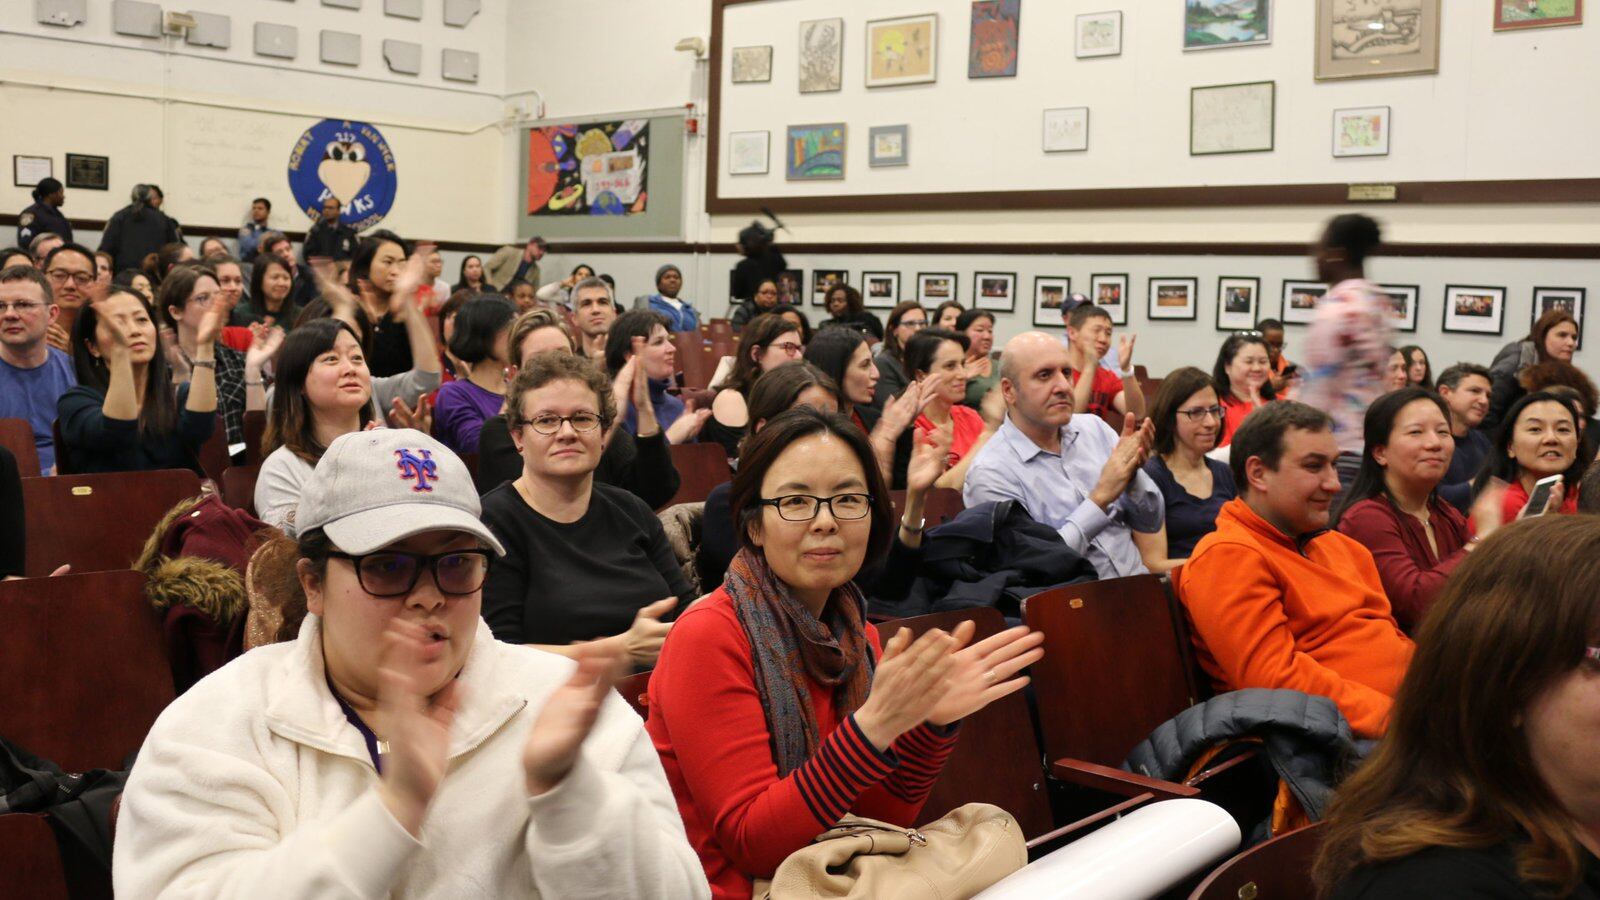 Parents in January 2020 applaud a speaker during a contentious meeting to discuss middle school integration plans for District 28 in Queens. Fights how to make New York City schools more representative of student demographics have filtered down to the races to elect Community Education Council members.